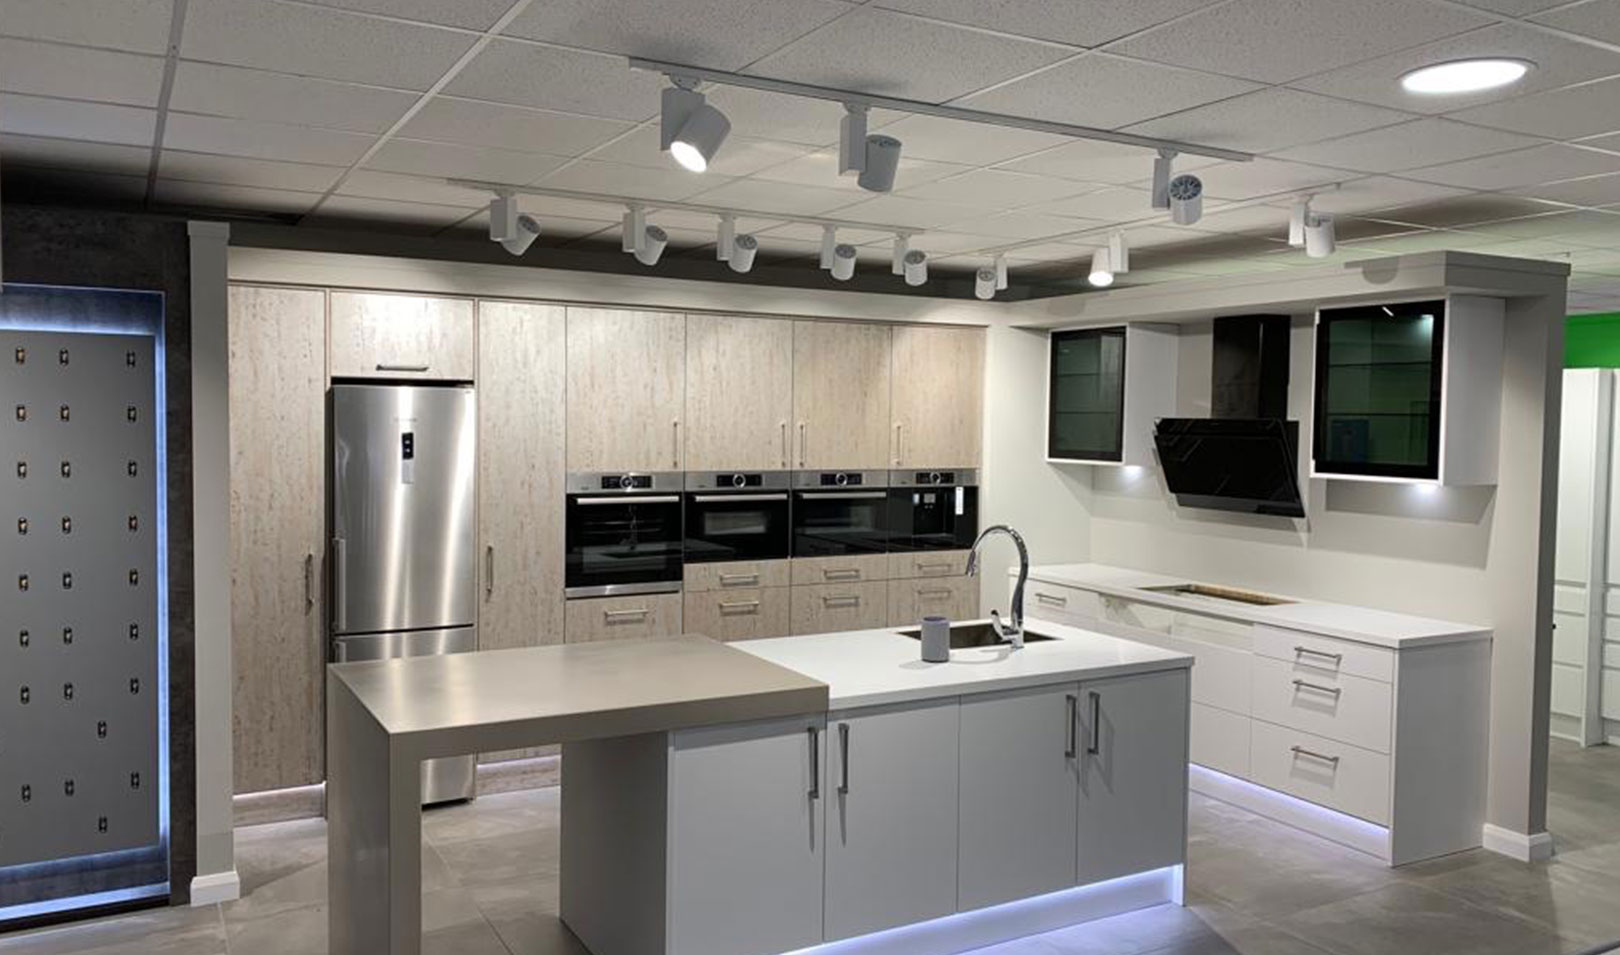 Wren-Kitchens-Glasgow-Show-Room-Fit-Out-8.jpg